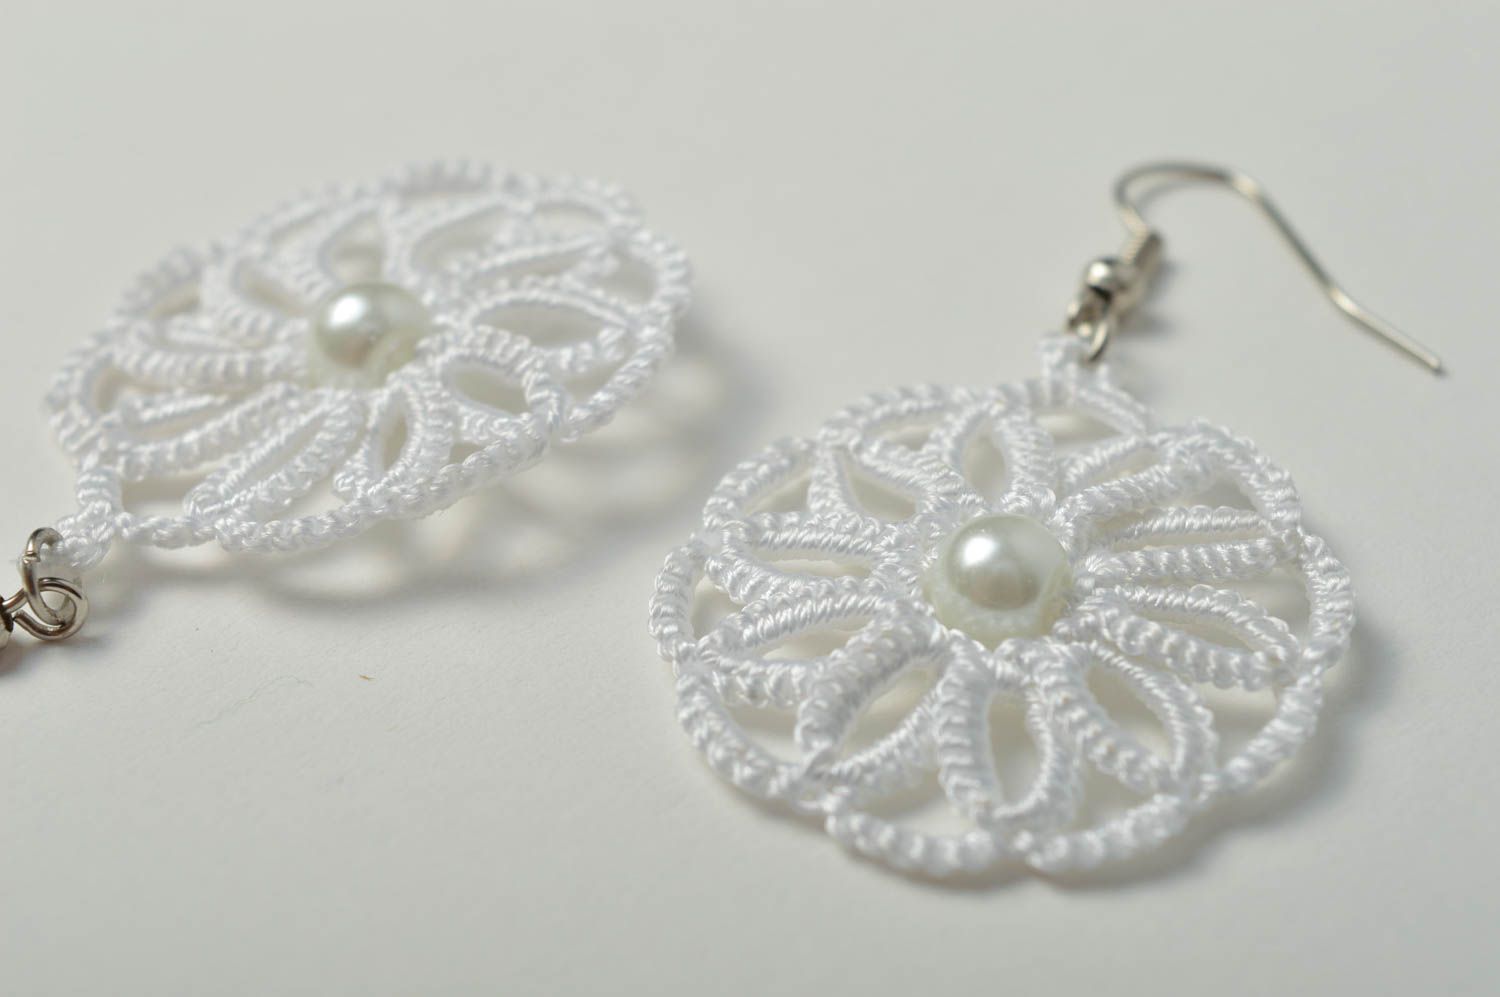 Unusual handmade woven lace earrings textile jewelry designs accessories for her photo 5